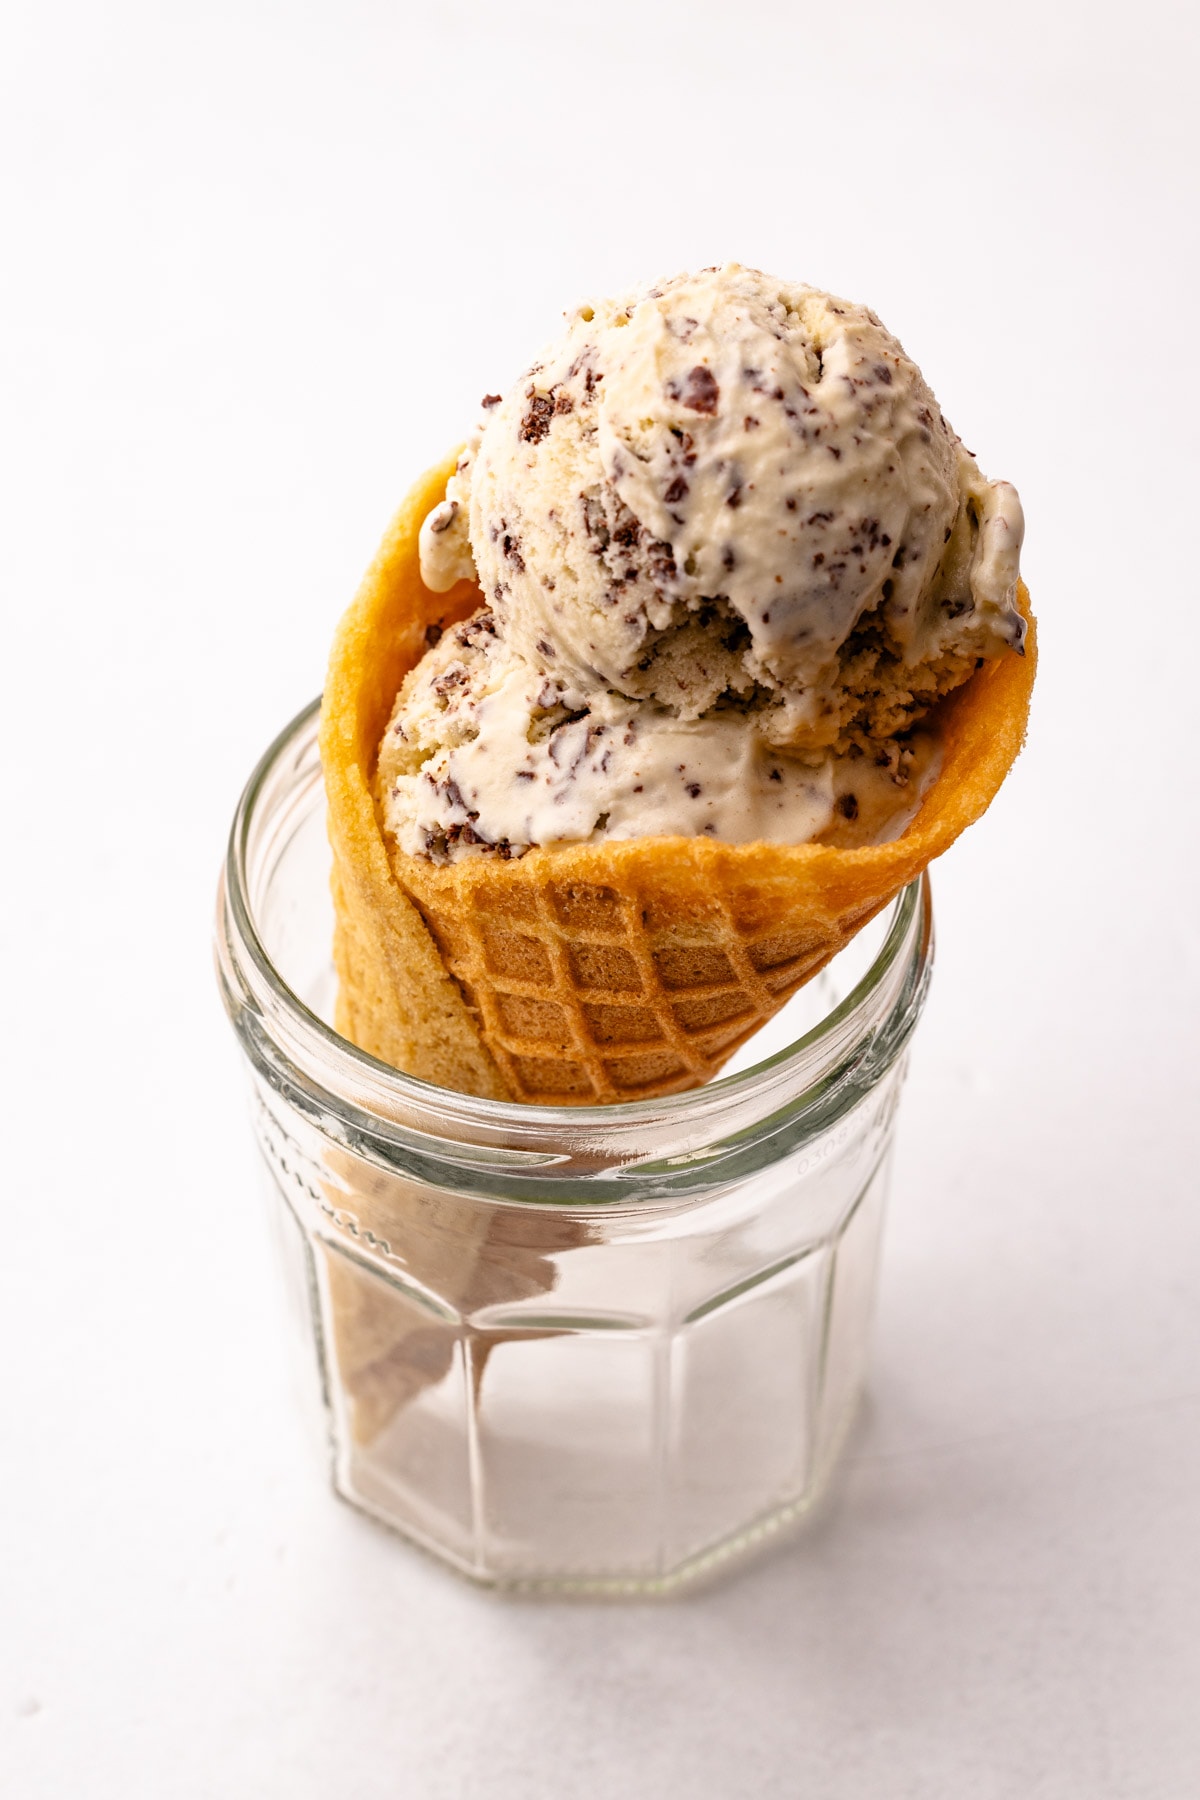 A scoop of ice cream in a homemade waffle cone.